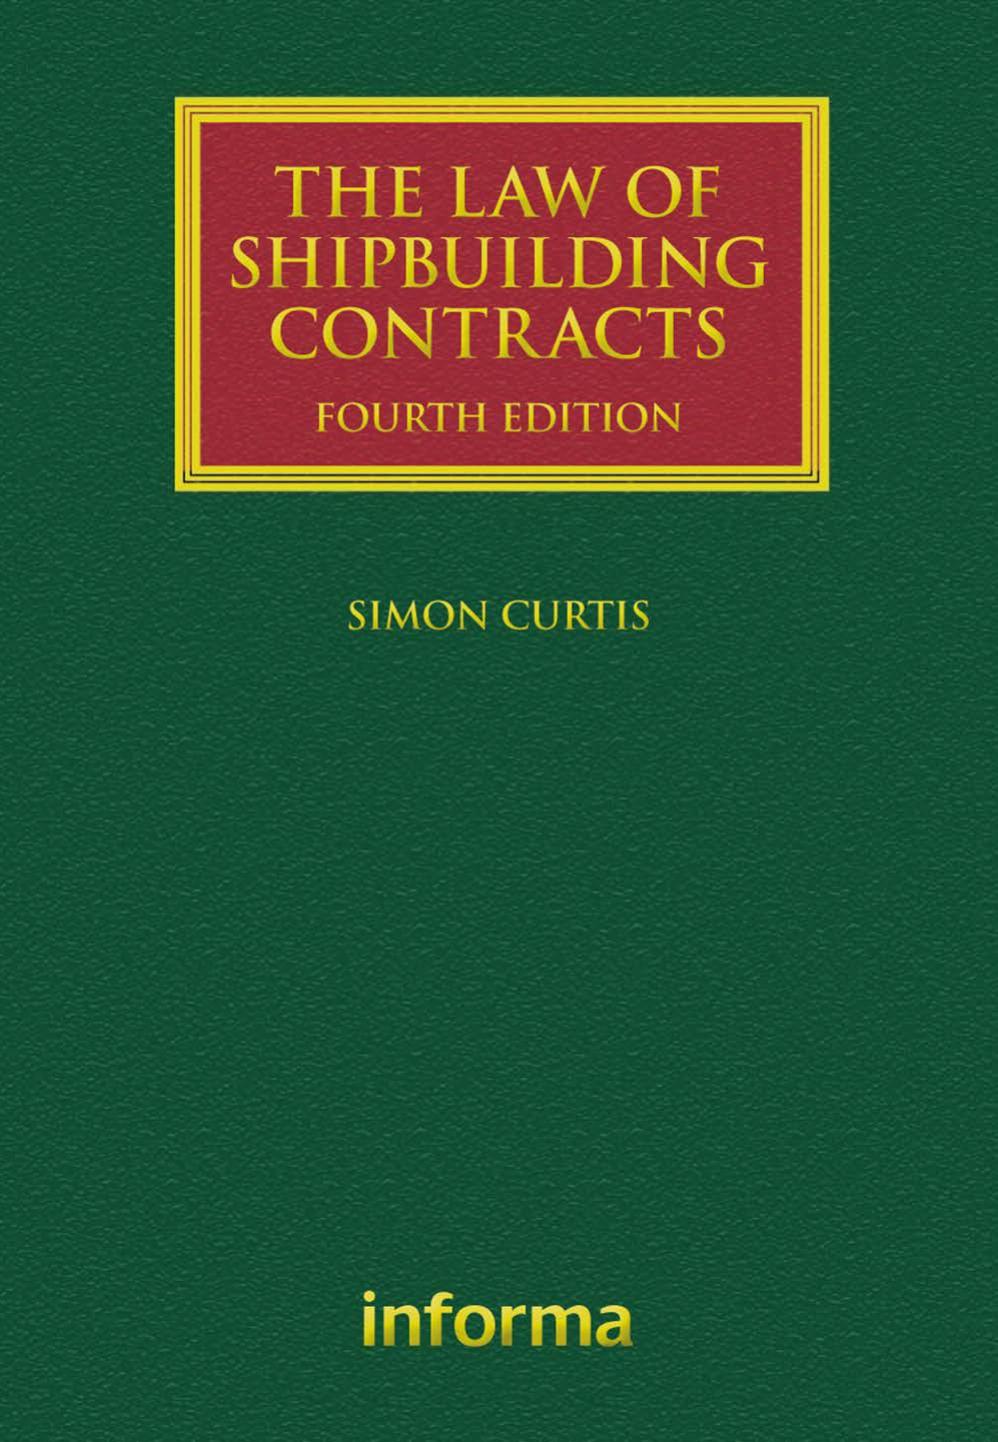 The Law of Shipbuilding Contracts 2012